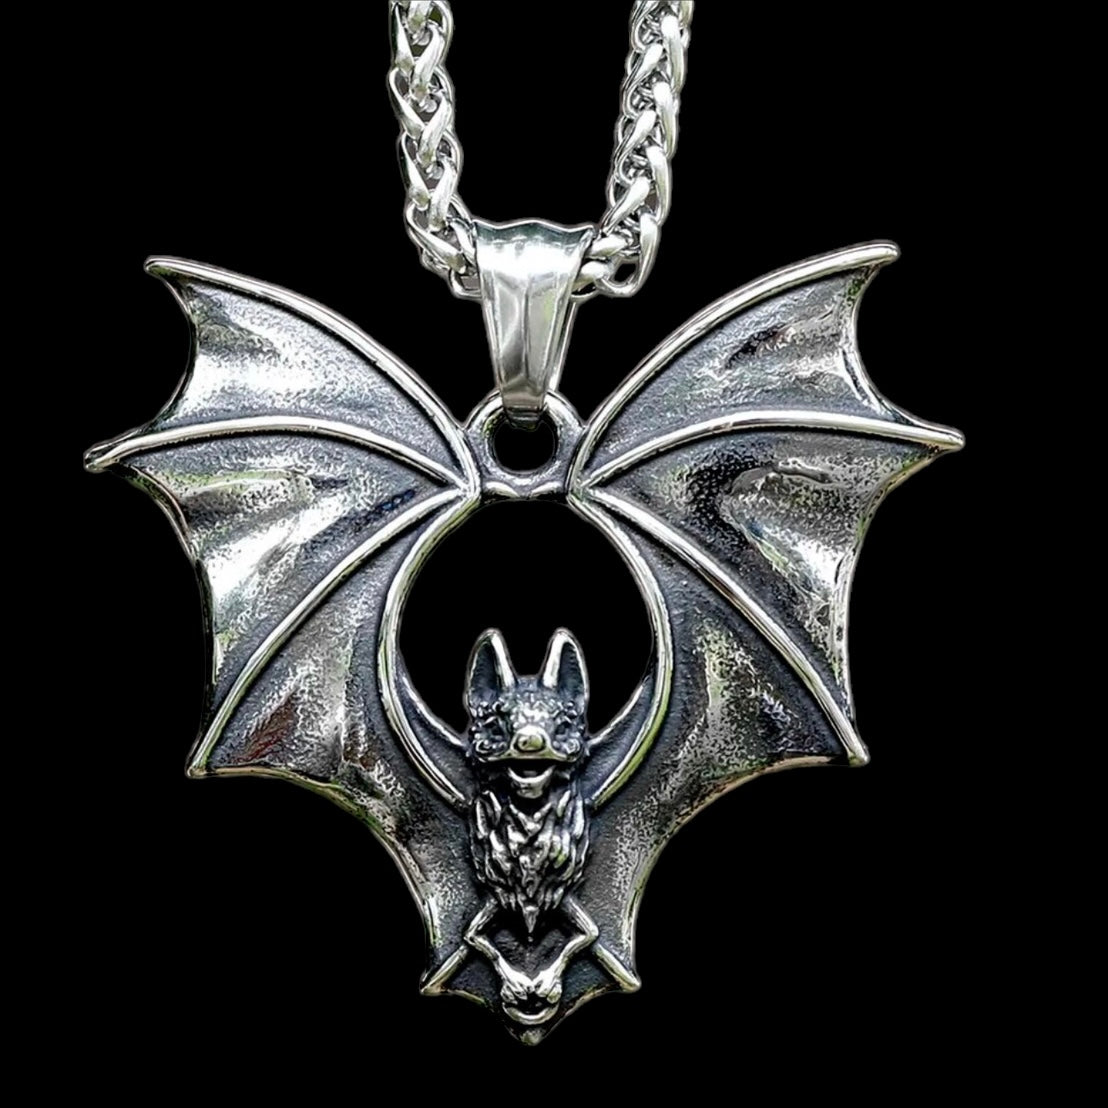 Stainless Steel Bat Necklace